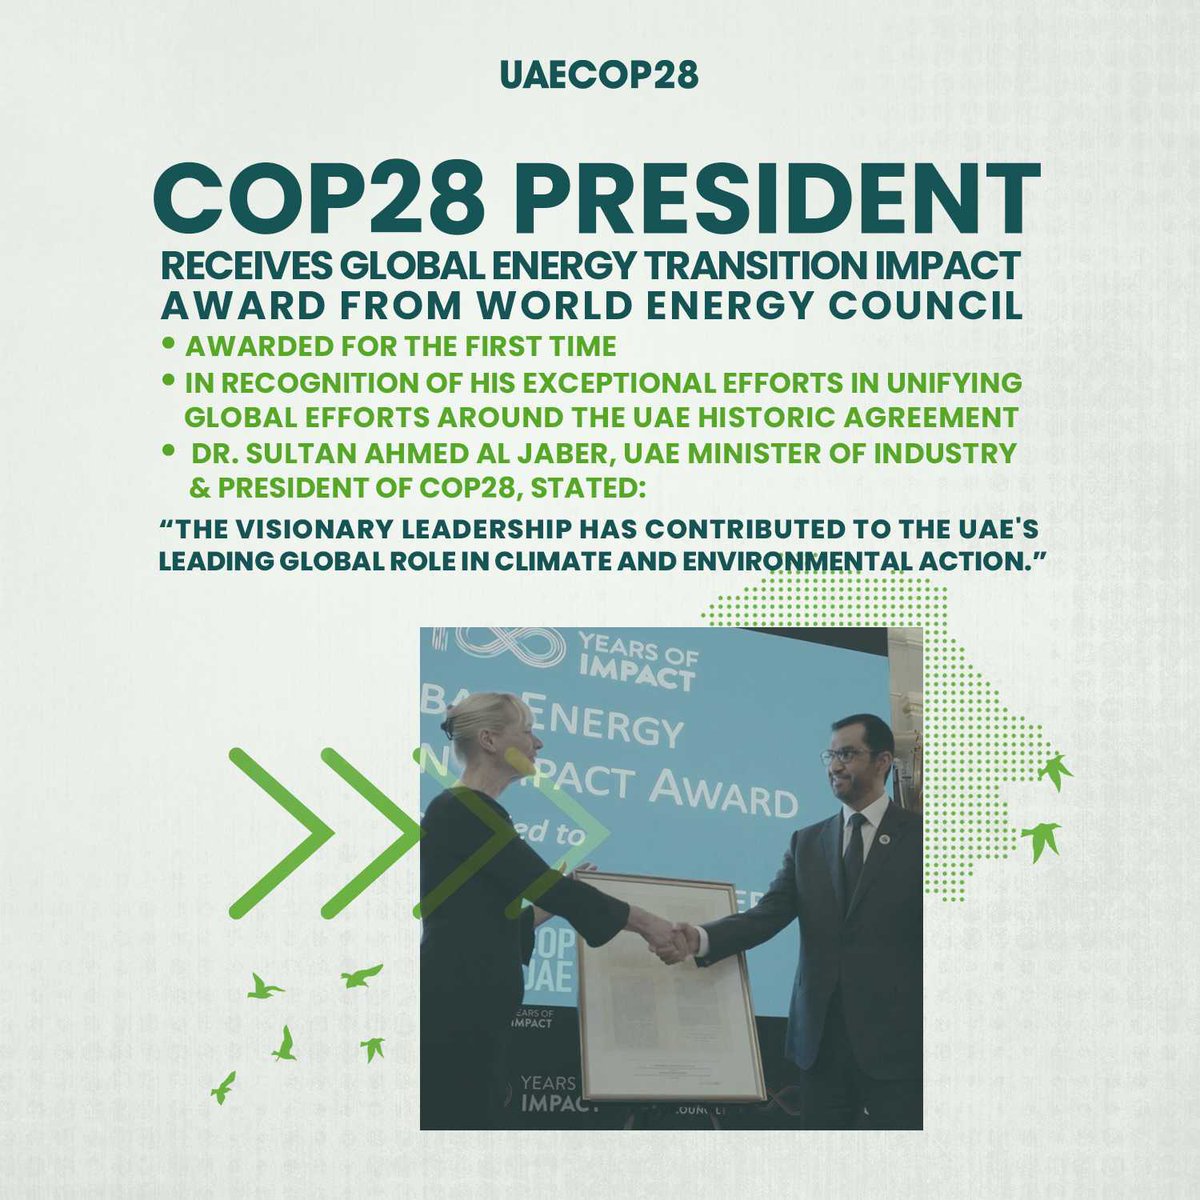 #Cop28 president receives global energy transition impact award from world energy council.